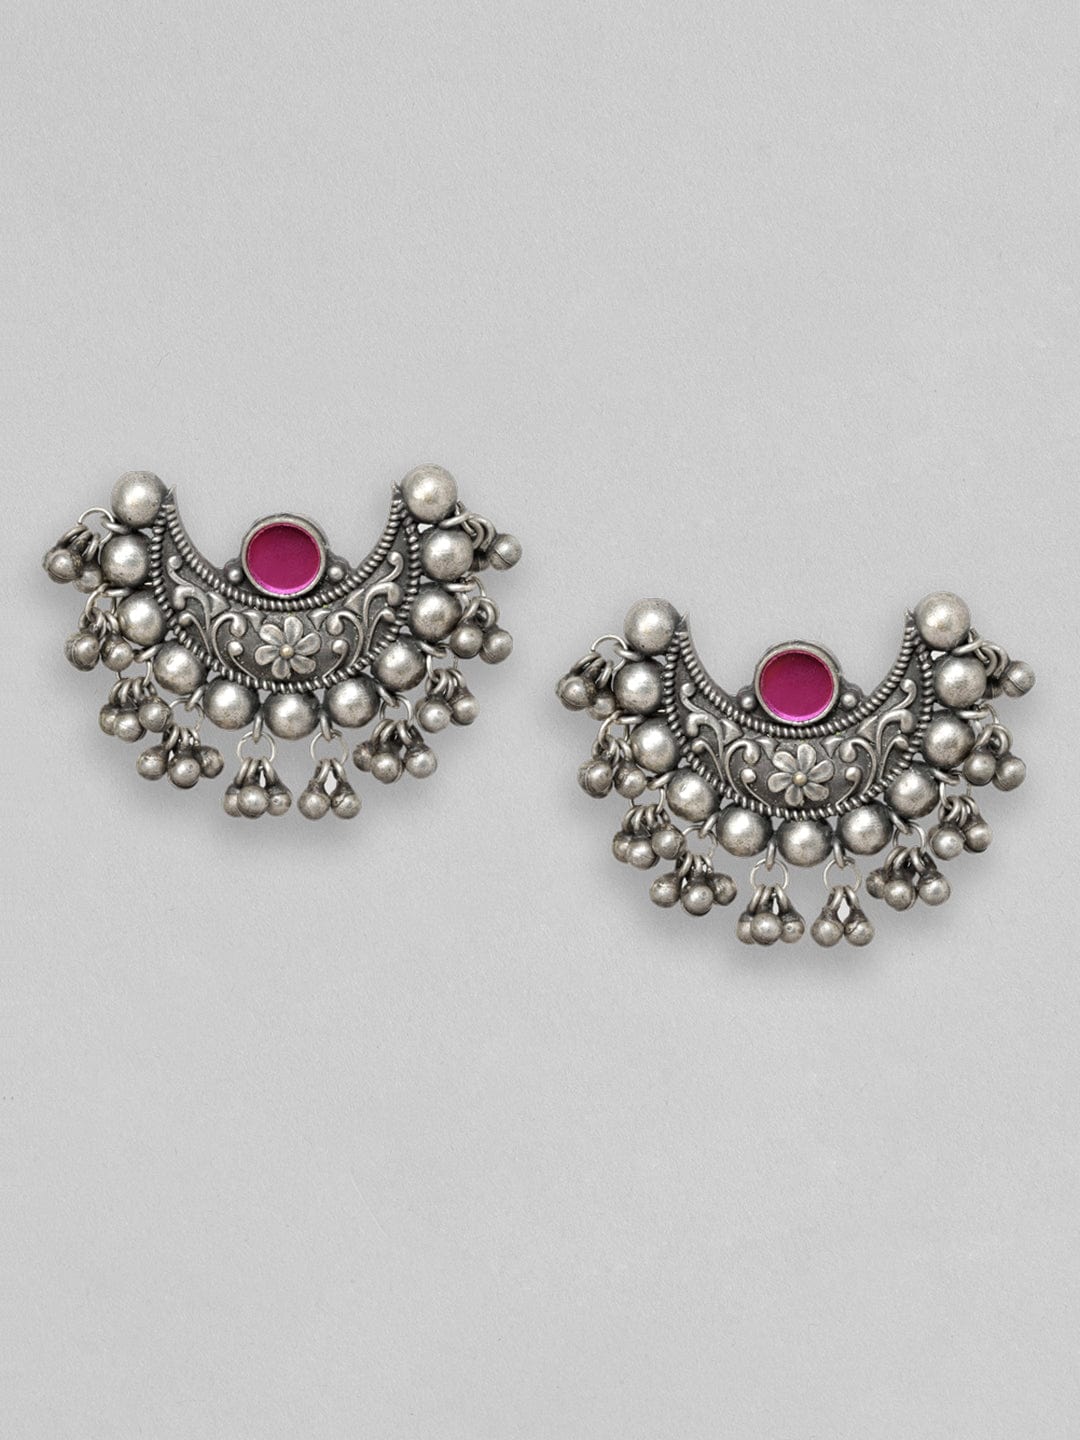 Rubans Silver Oxidised Earrings With Pink Stone And Silver Beads Earrings